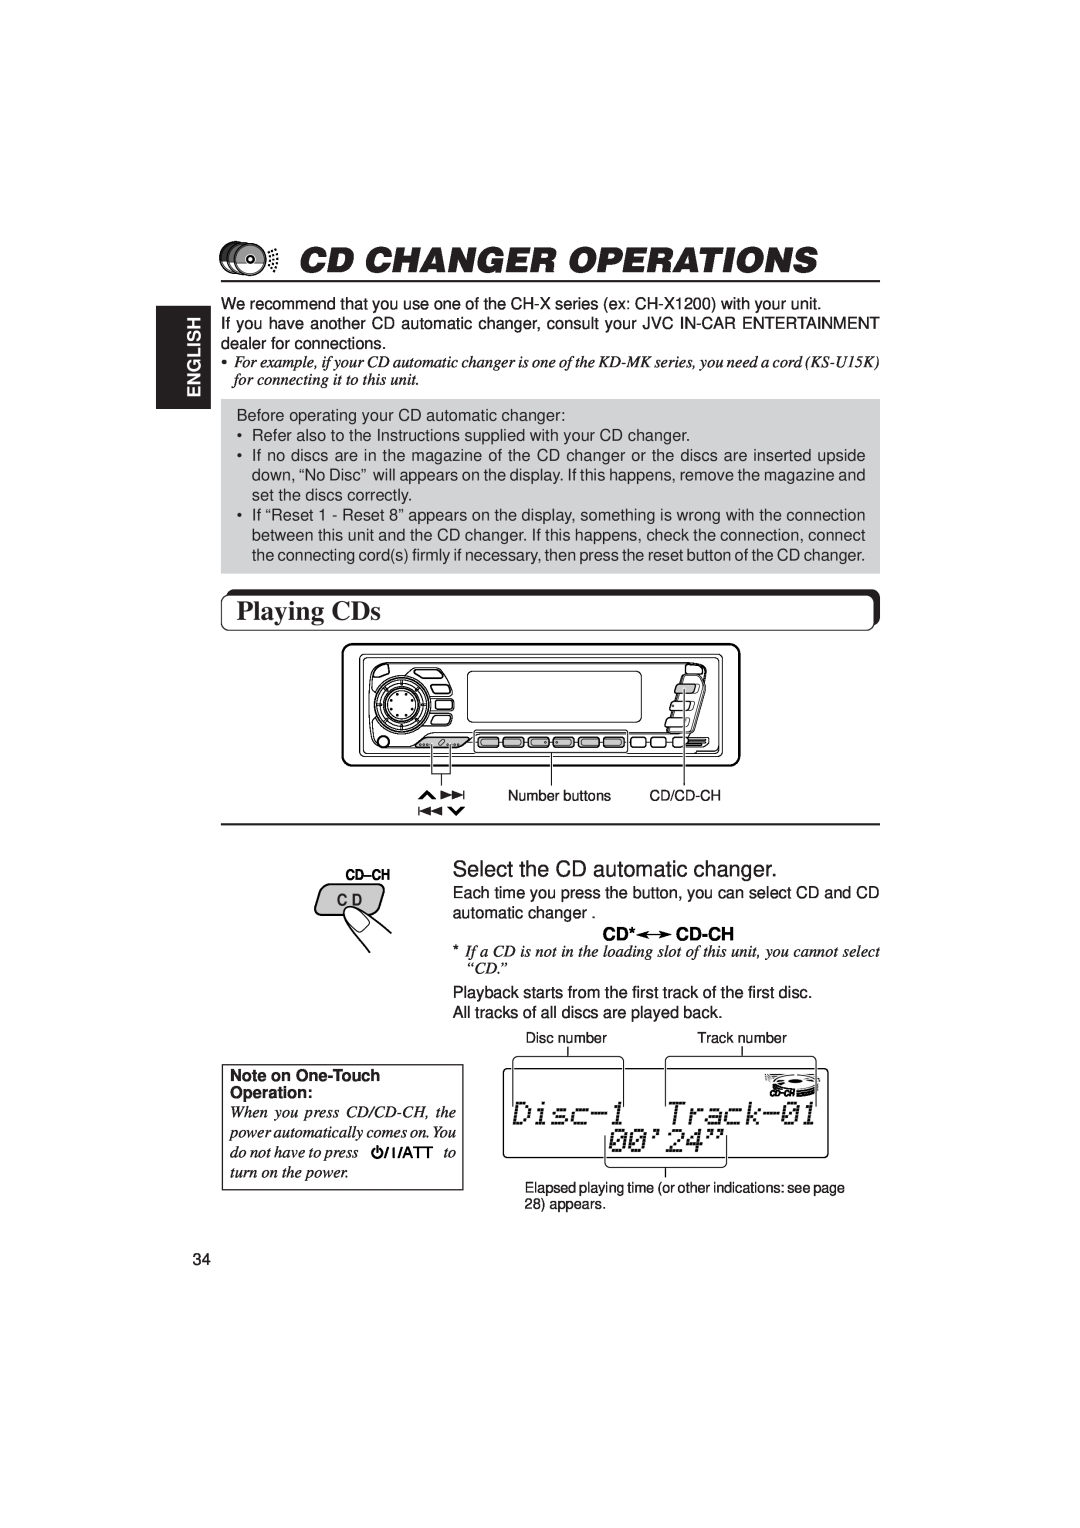 JVC KD-SX1500R manual Cd Changer Operations, Playing CDs, Select the CD automatic changer, Cd* Cd-Ch, English 